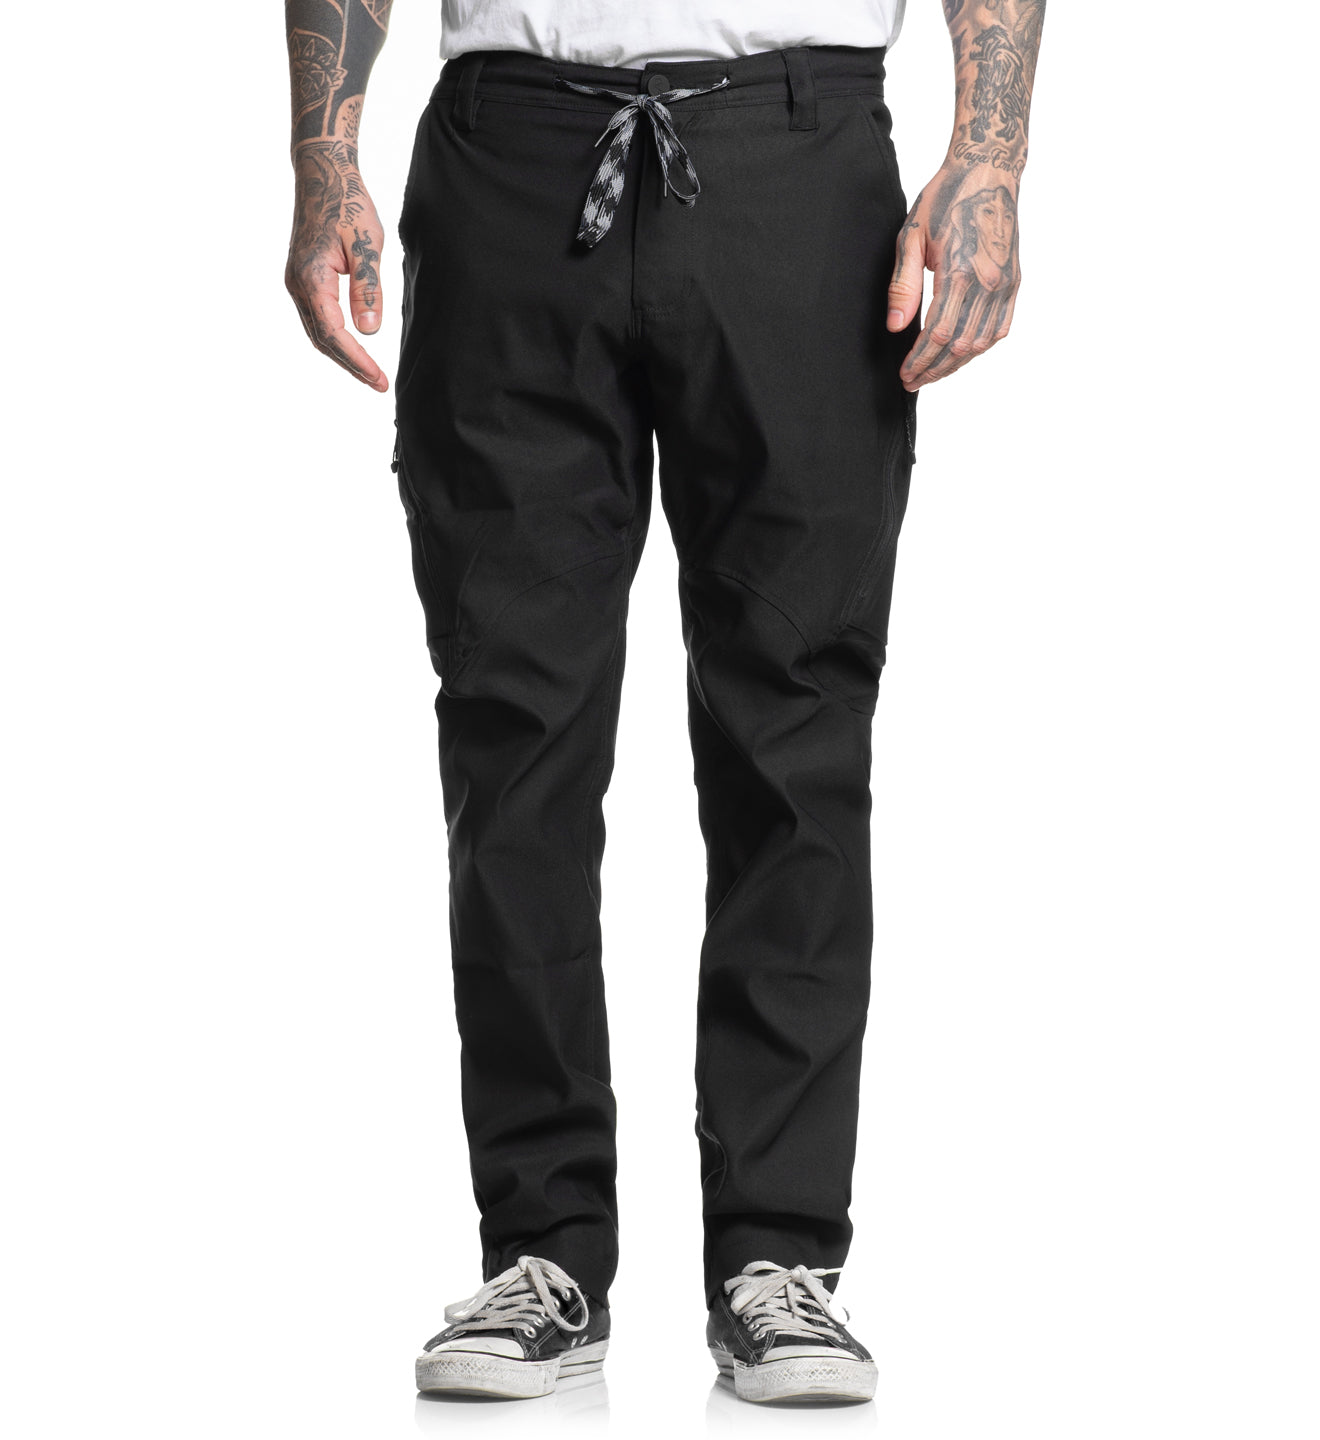 Expedition Stretch Cargo Pants - Black